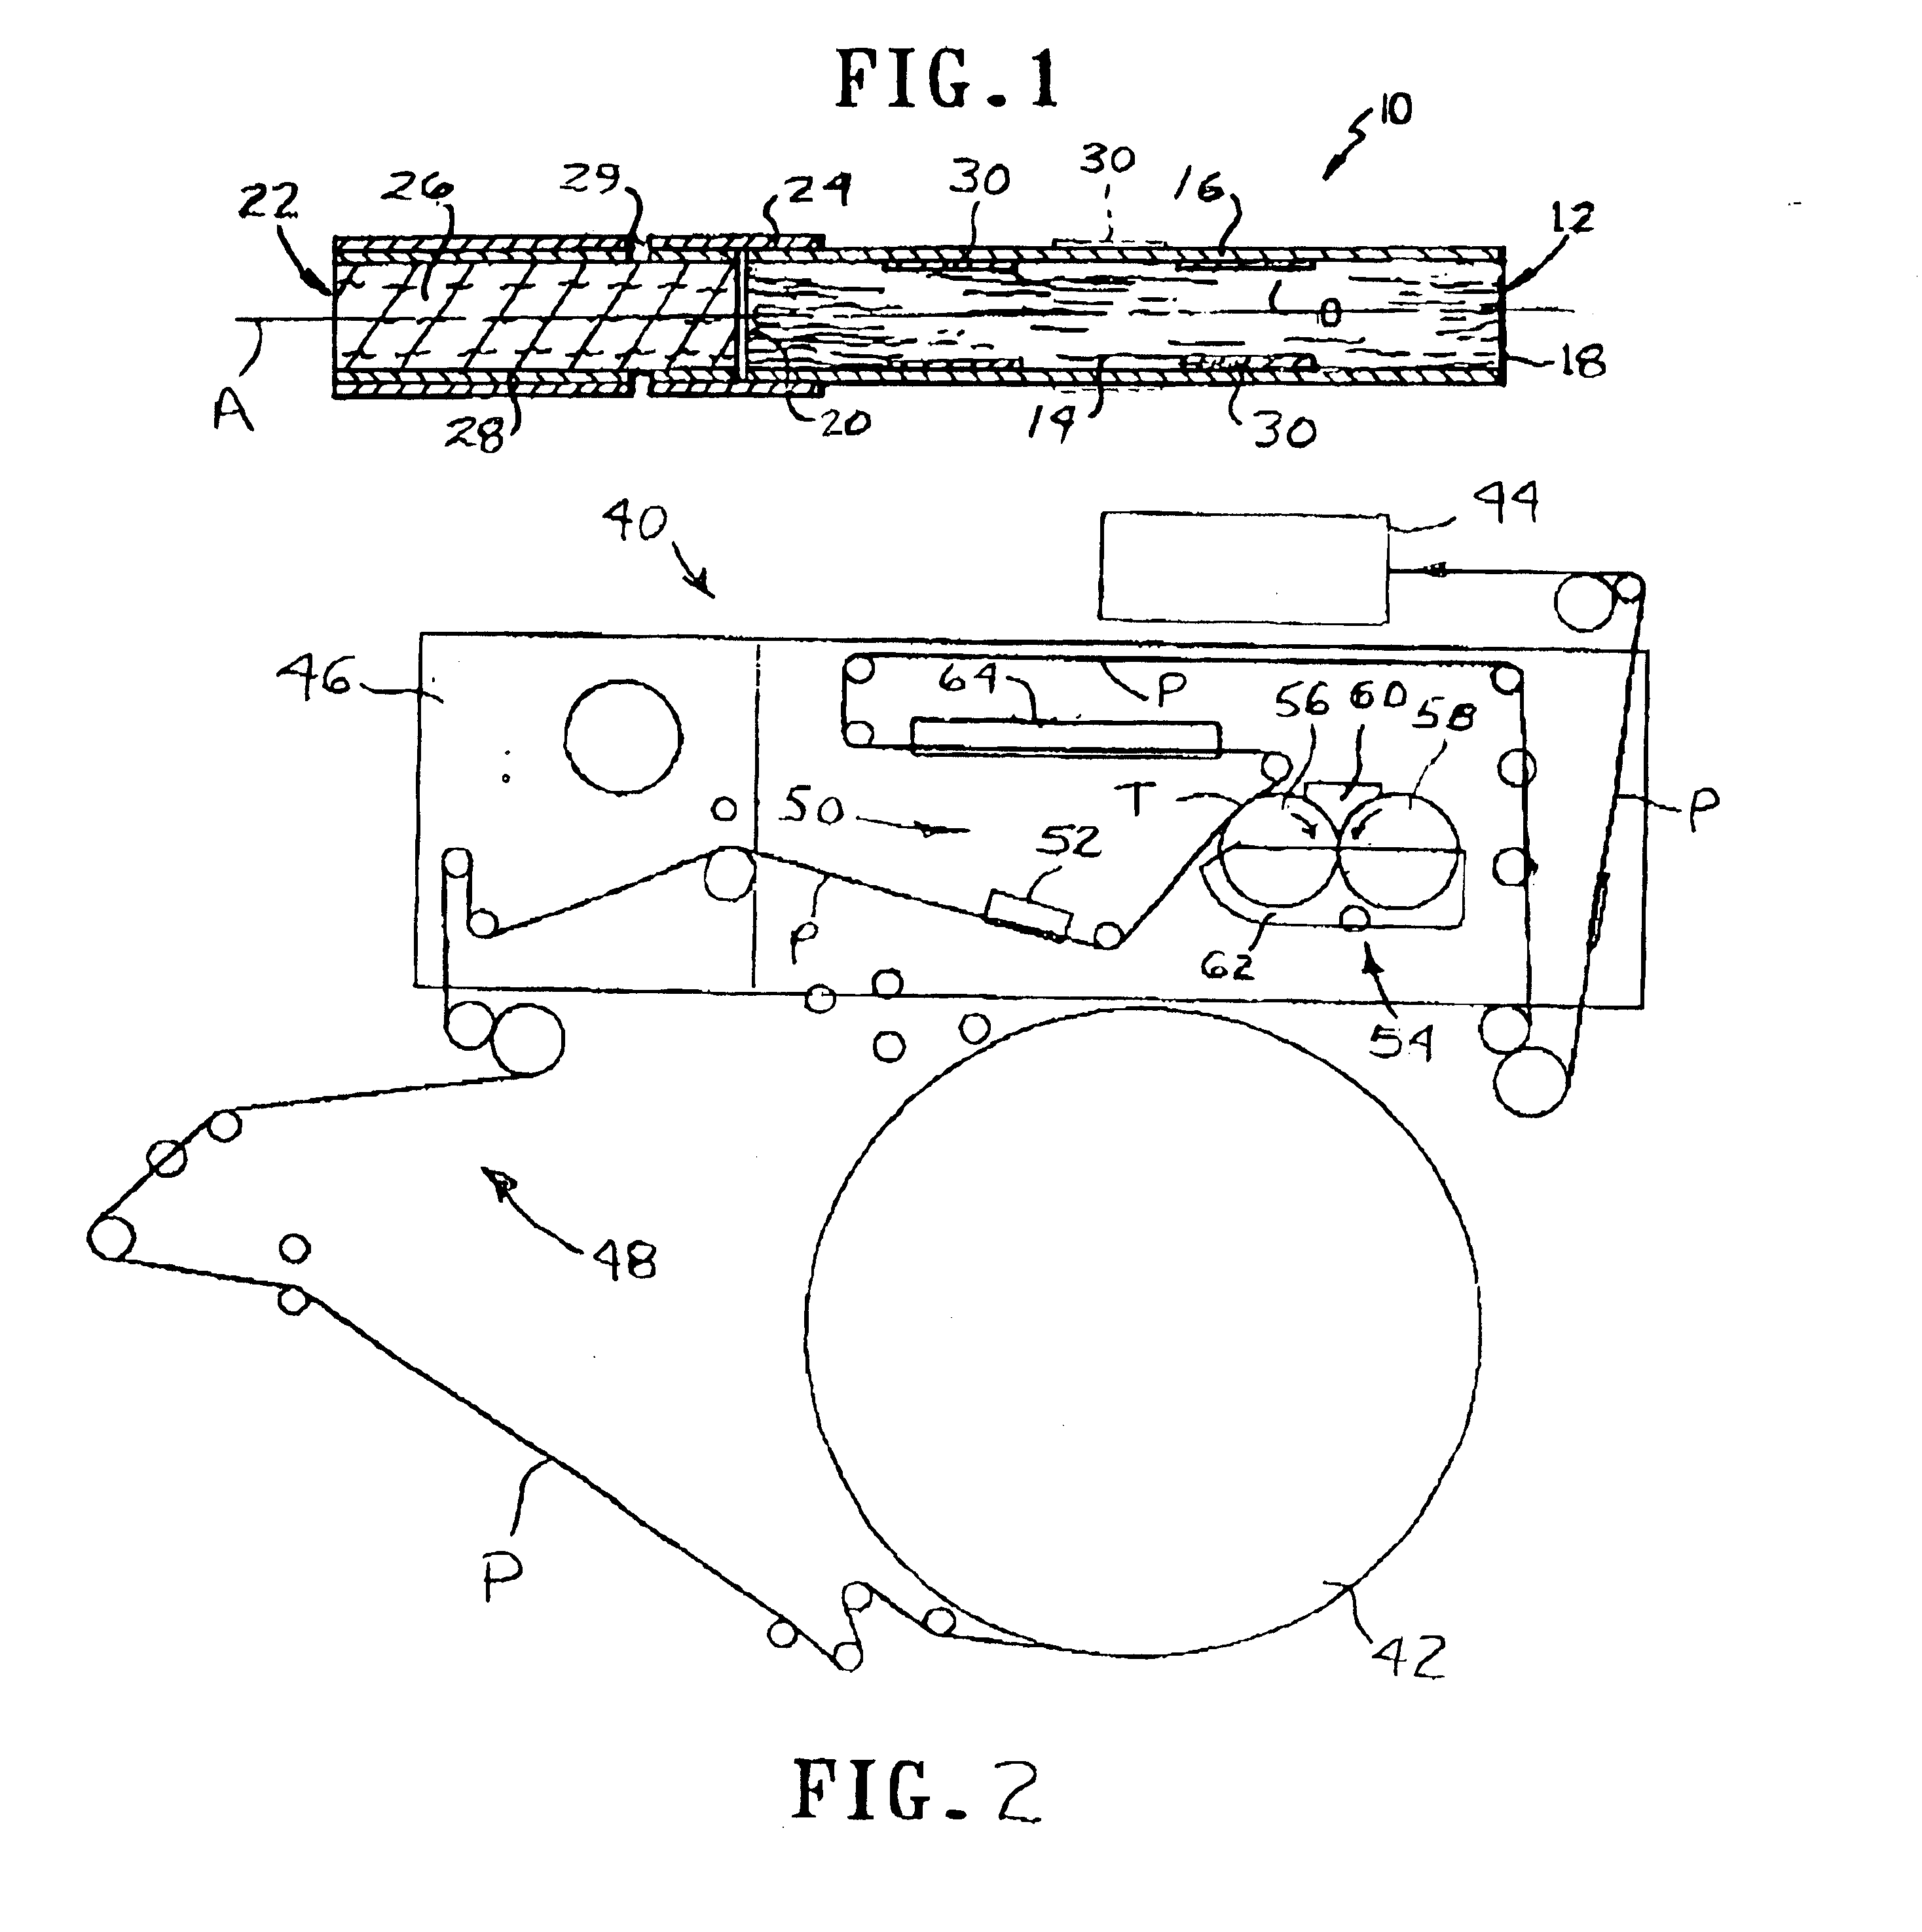 Method for producing a reduced ignition propensity smoking article